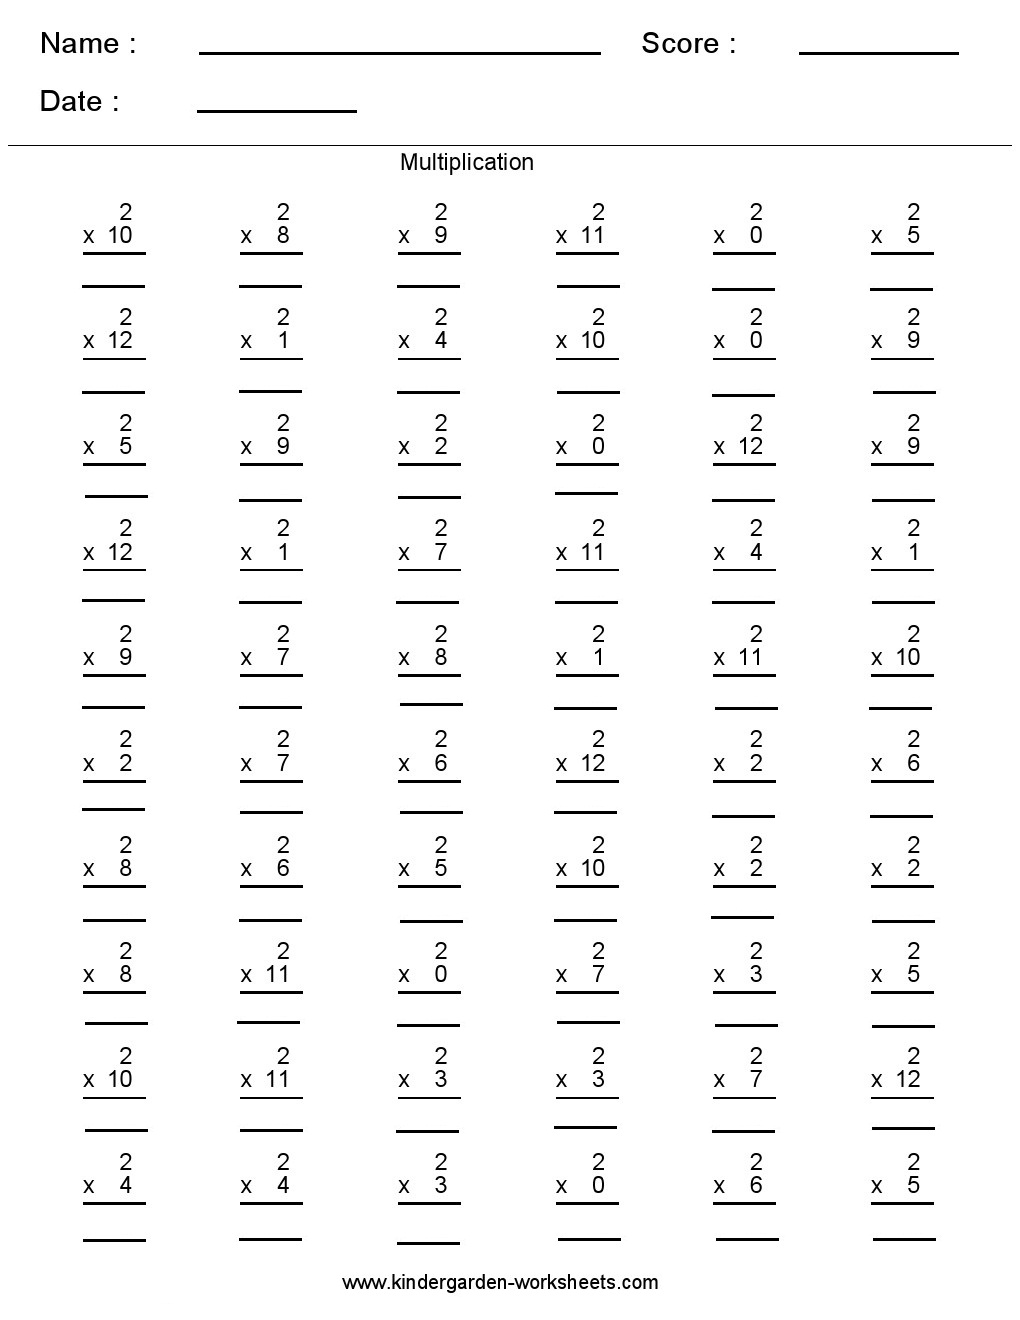 4-best-images-of-5th-grade-math-worksheets-multiplication-printable-5th